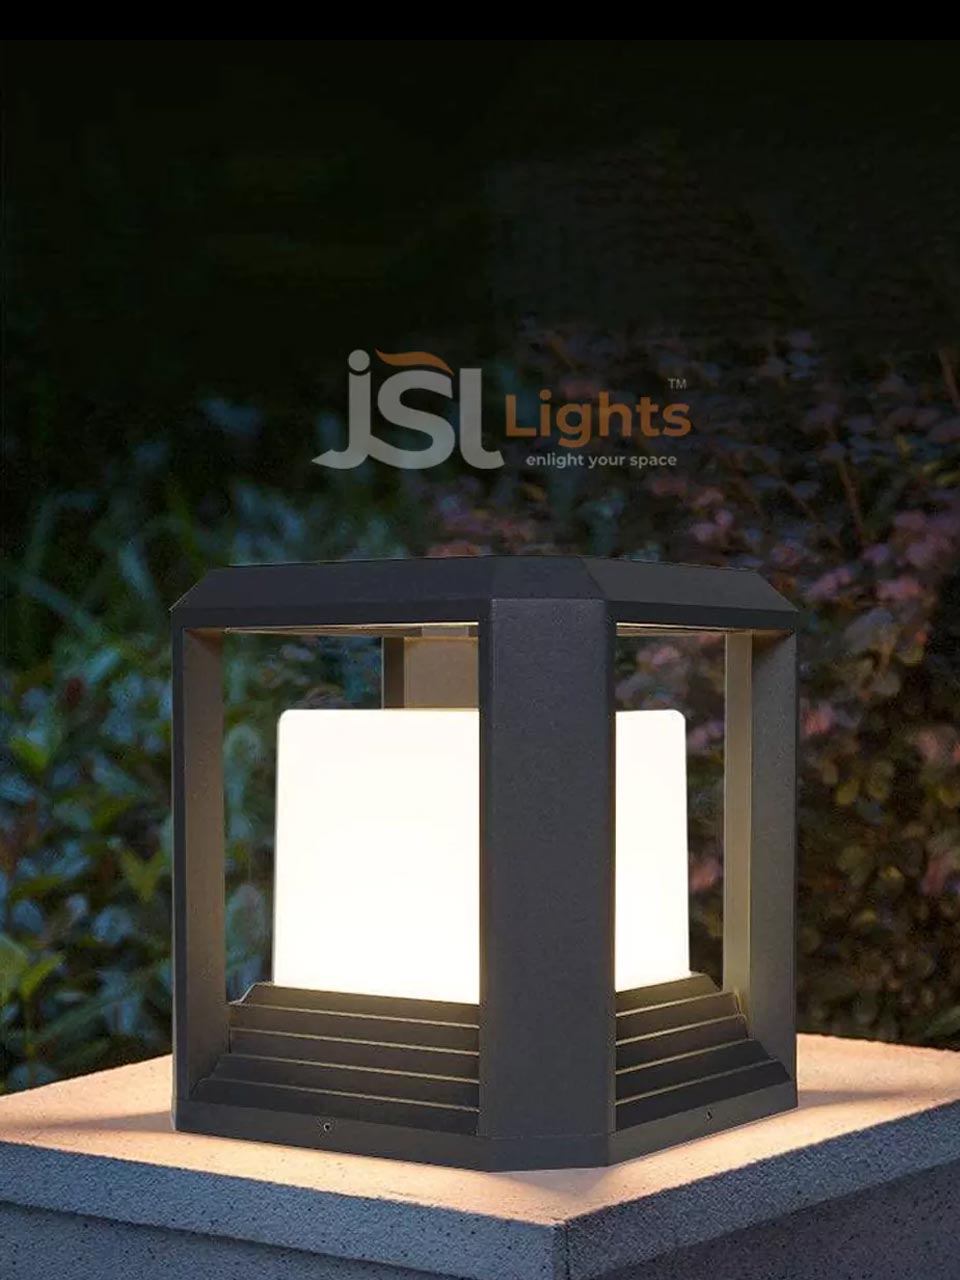 Square Outdoor LED Gate Light 8802 Big 7IN Pillar Post Light with E27 Holder Aluminium Body and PC Diffuser IP65